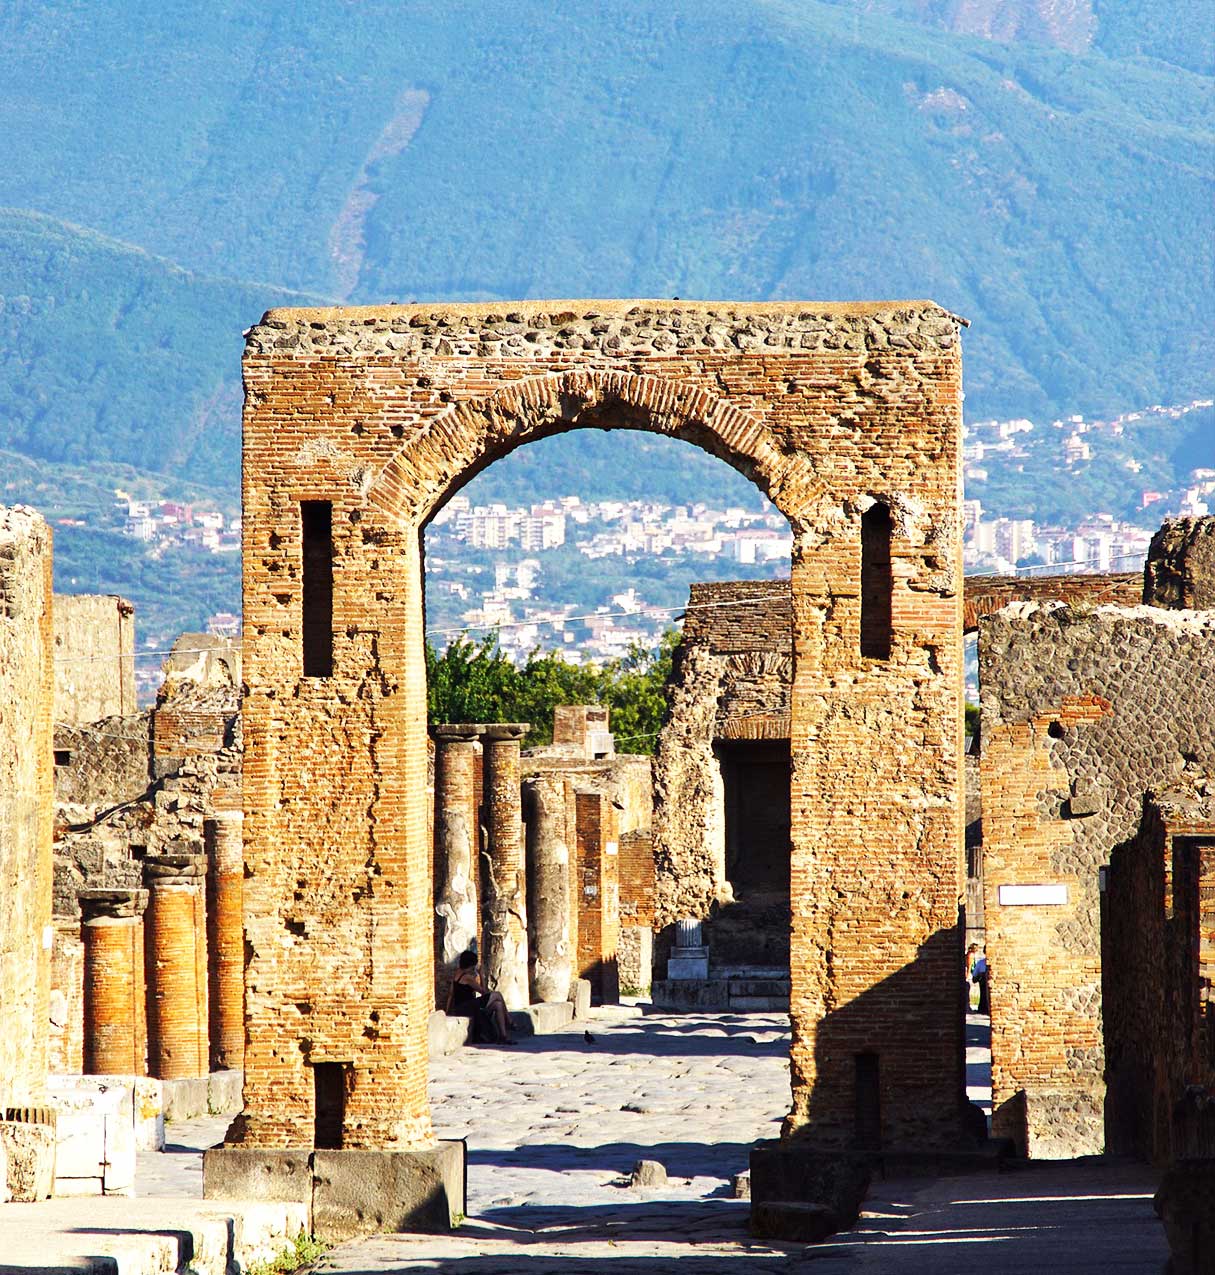 Pompeii Ruins Day Tour from Rome